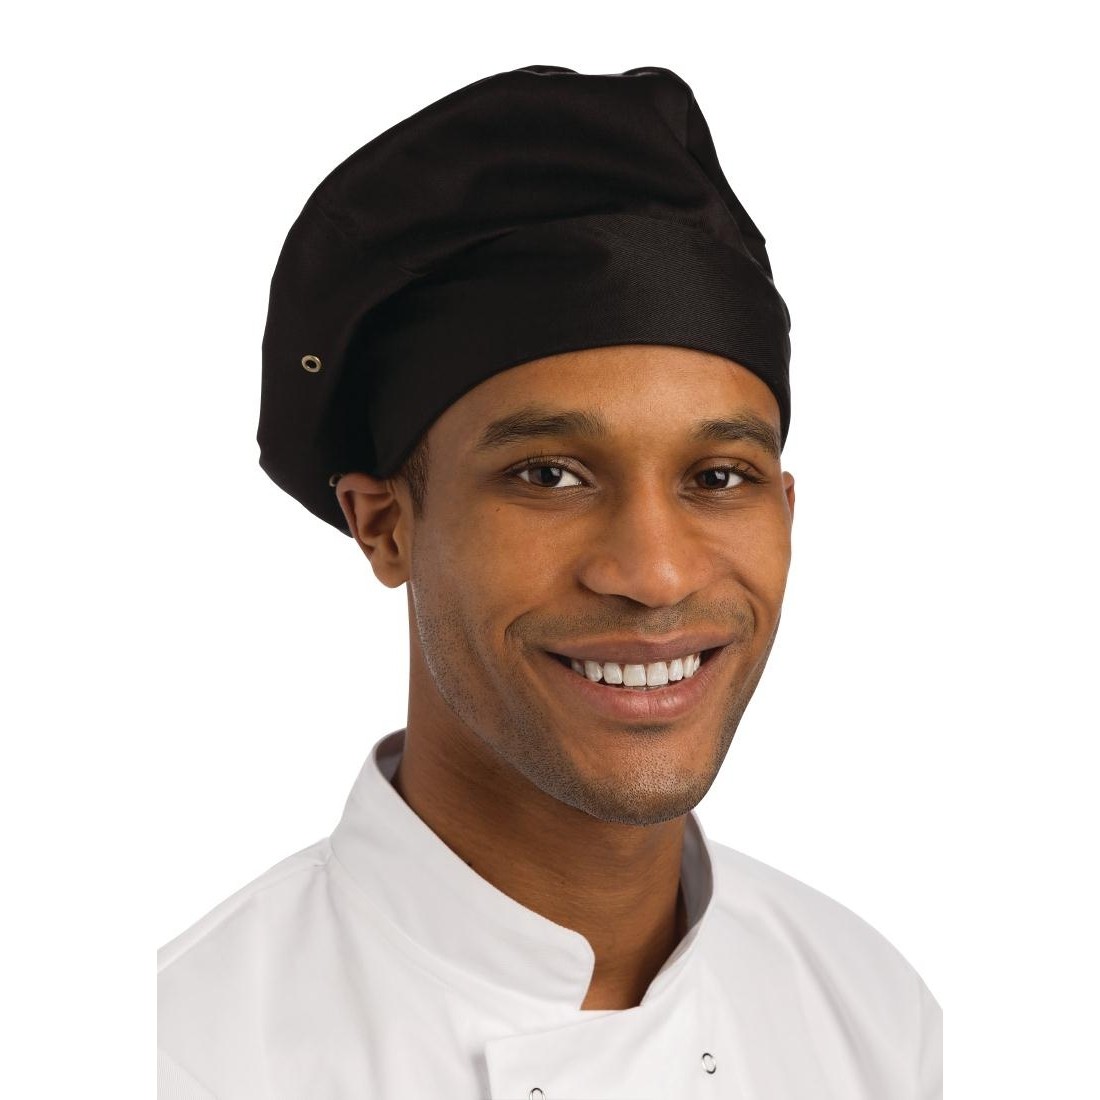 Chef Works Toque Chefs Hat Black - Chef's Hats & Towels - MBS